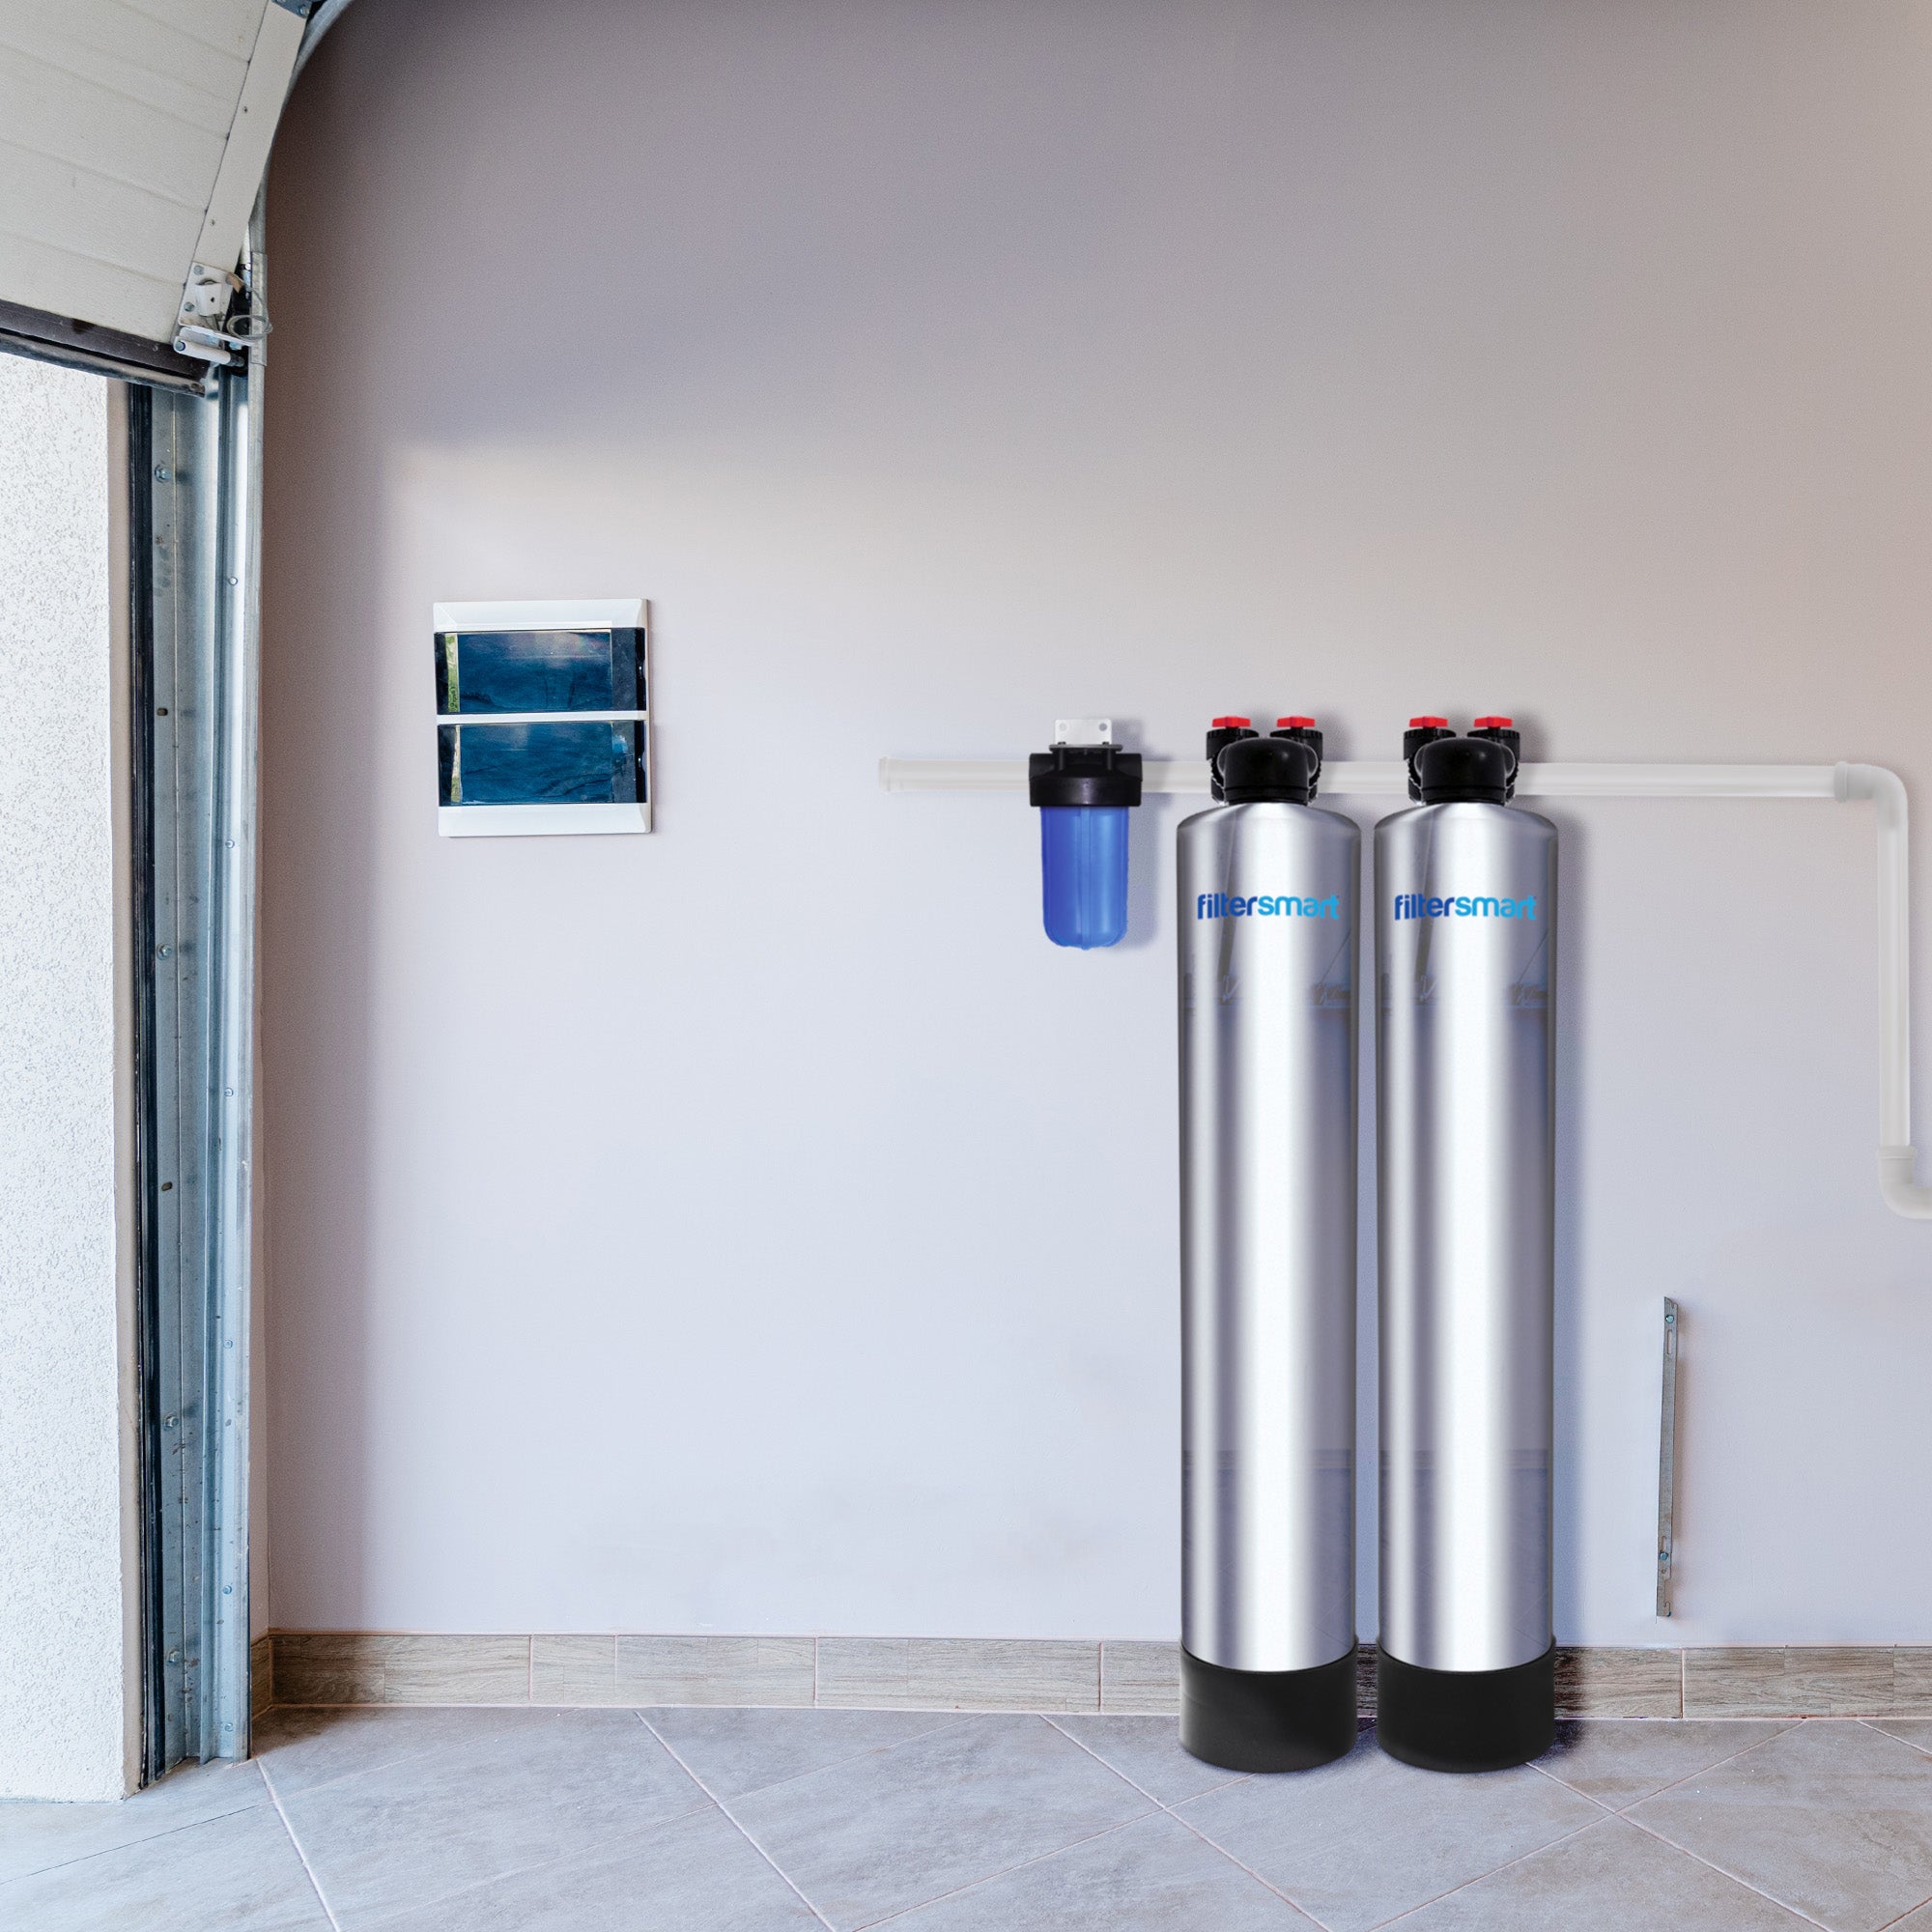 How Much Do Water Softeners Cost? Let's Break Down Price and Costs of Different Systems